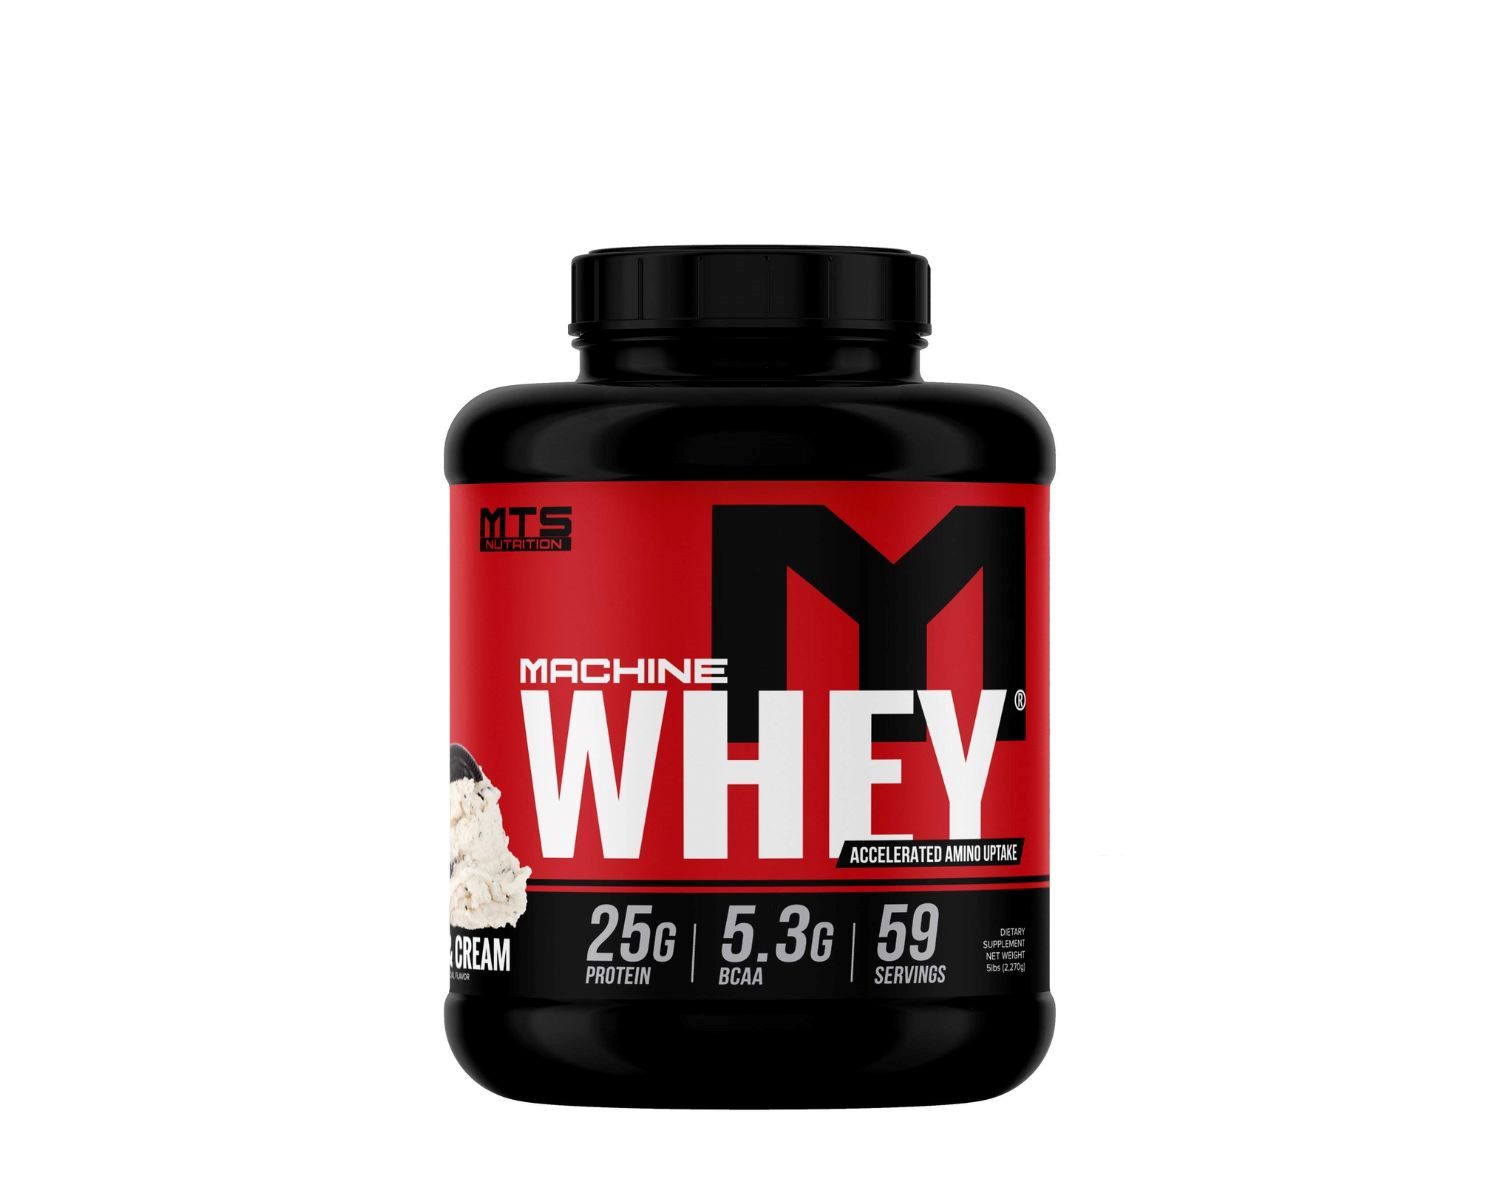 10-mts-machine-whey-nutrition-facts